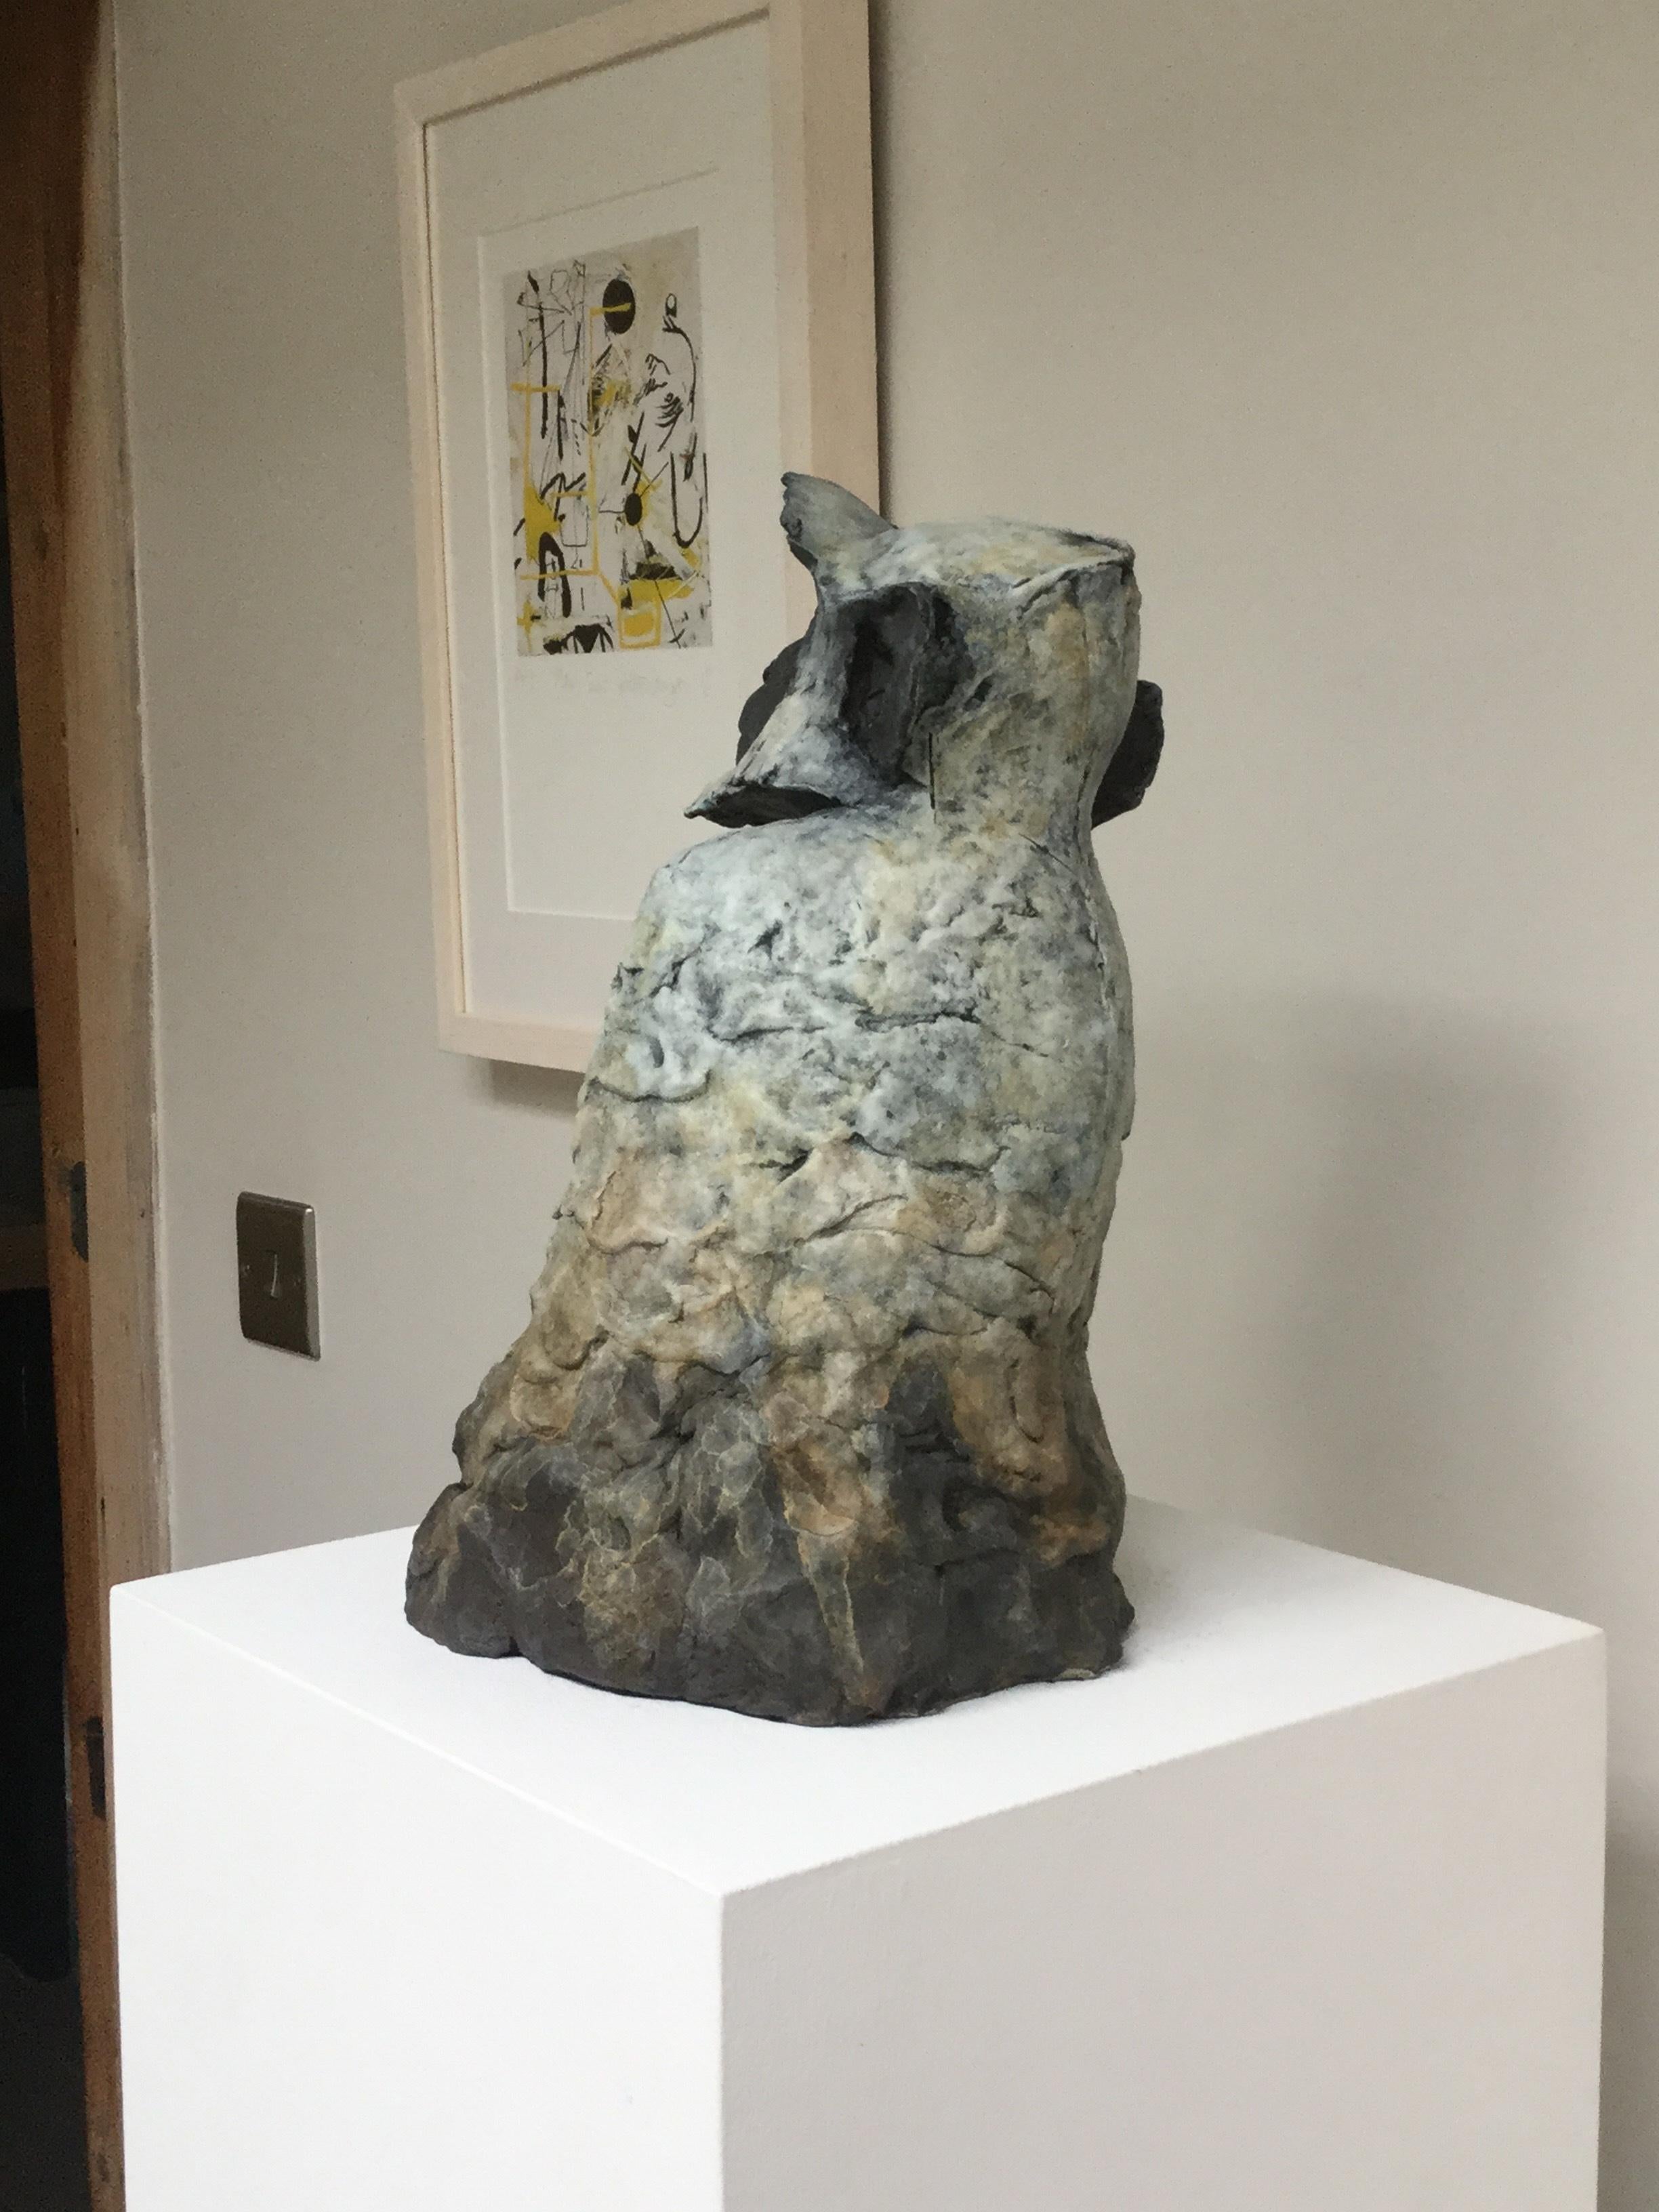 Nichola Theakston (1967) has established herself as one of the UK’s foremost contemporary sculptors working within the animal genre. 

Primates are Nichola's favorite subject. In her words: 'The notion that an individual creature may experience some